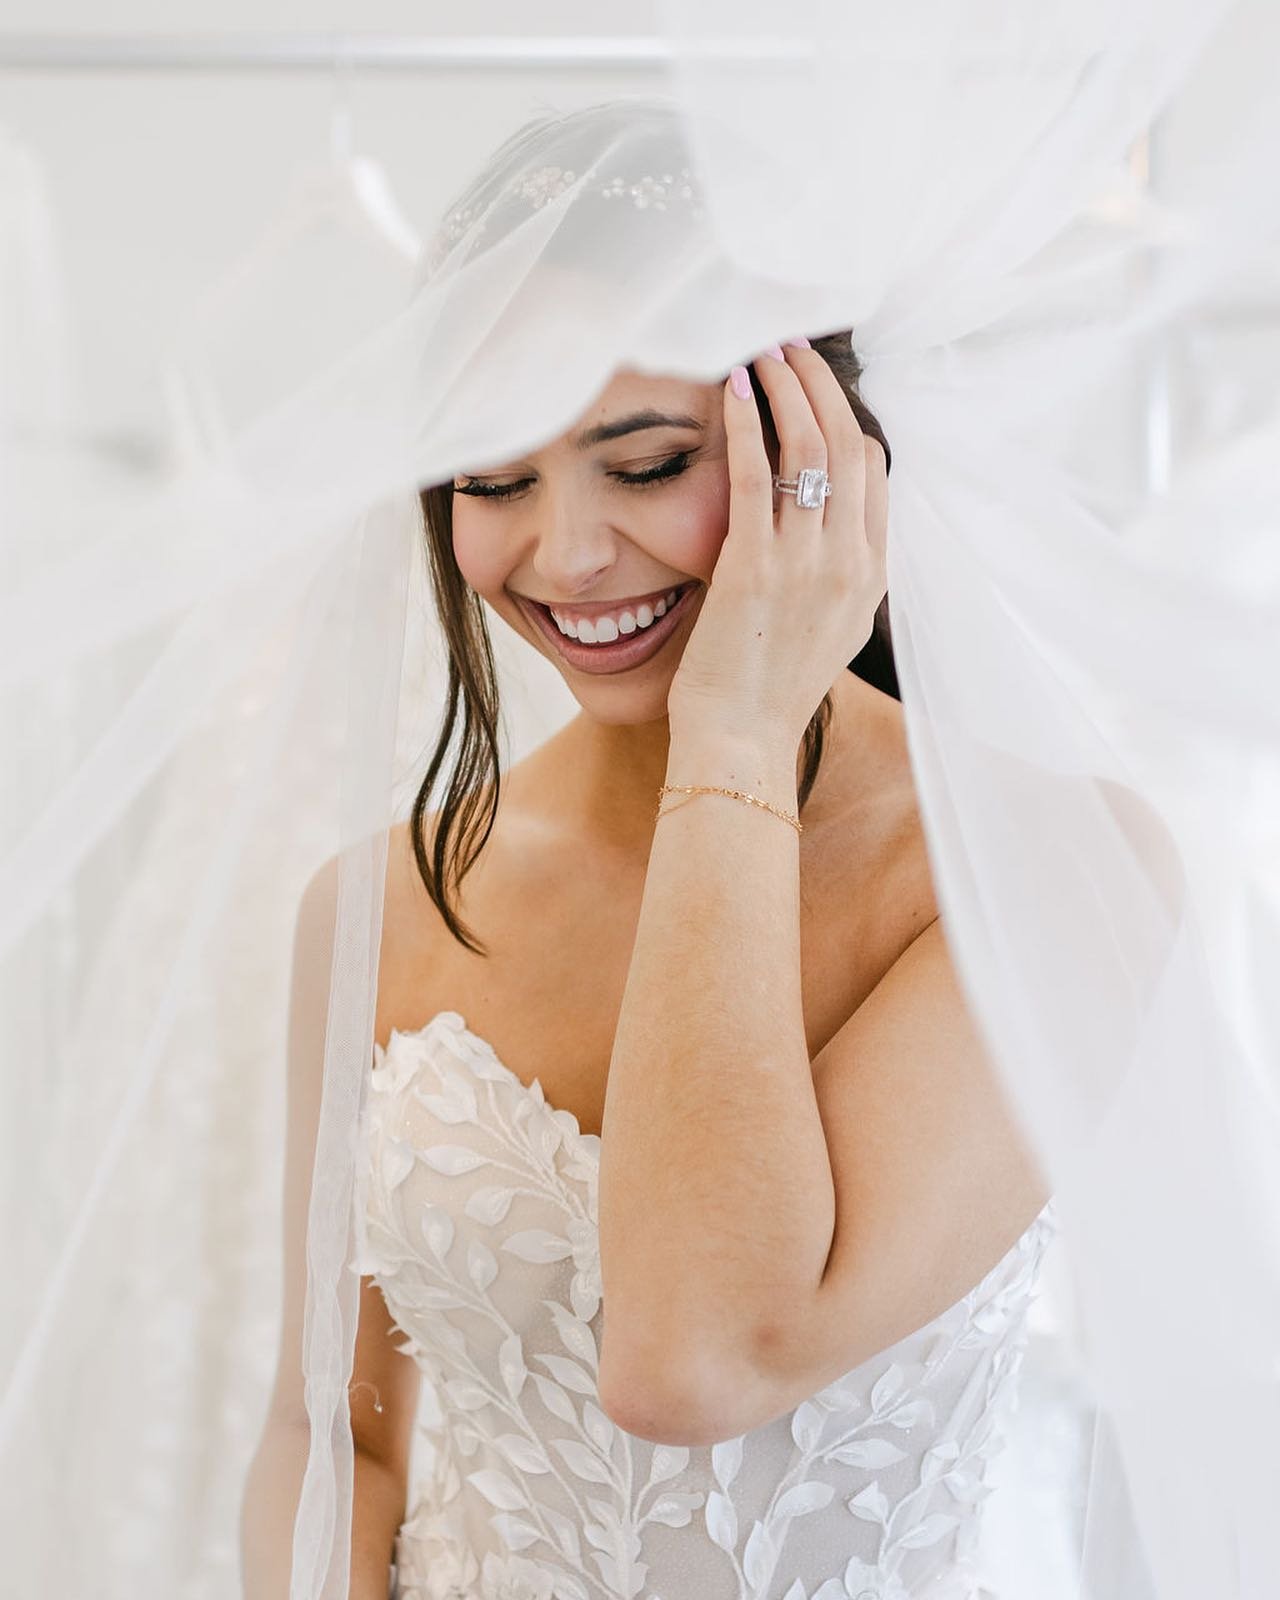 Veil details!!! It&rsquo;s a perfect accessory to get all those dreamy looks with your wedding photographer.💗
.
.
#veil #weddingveil #bridalaccessories